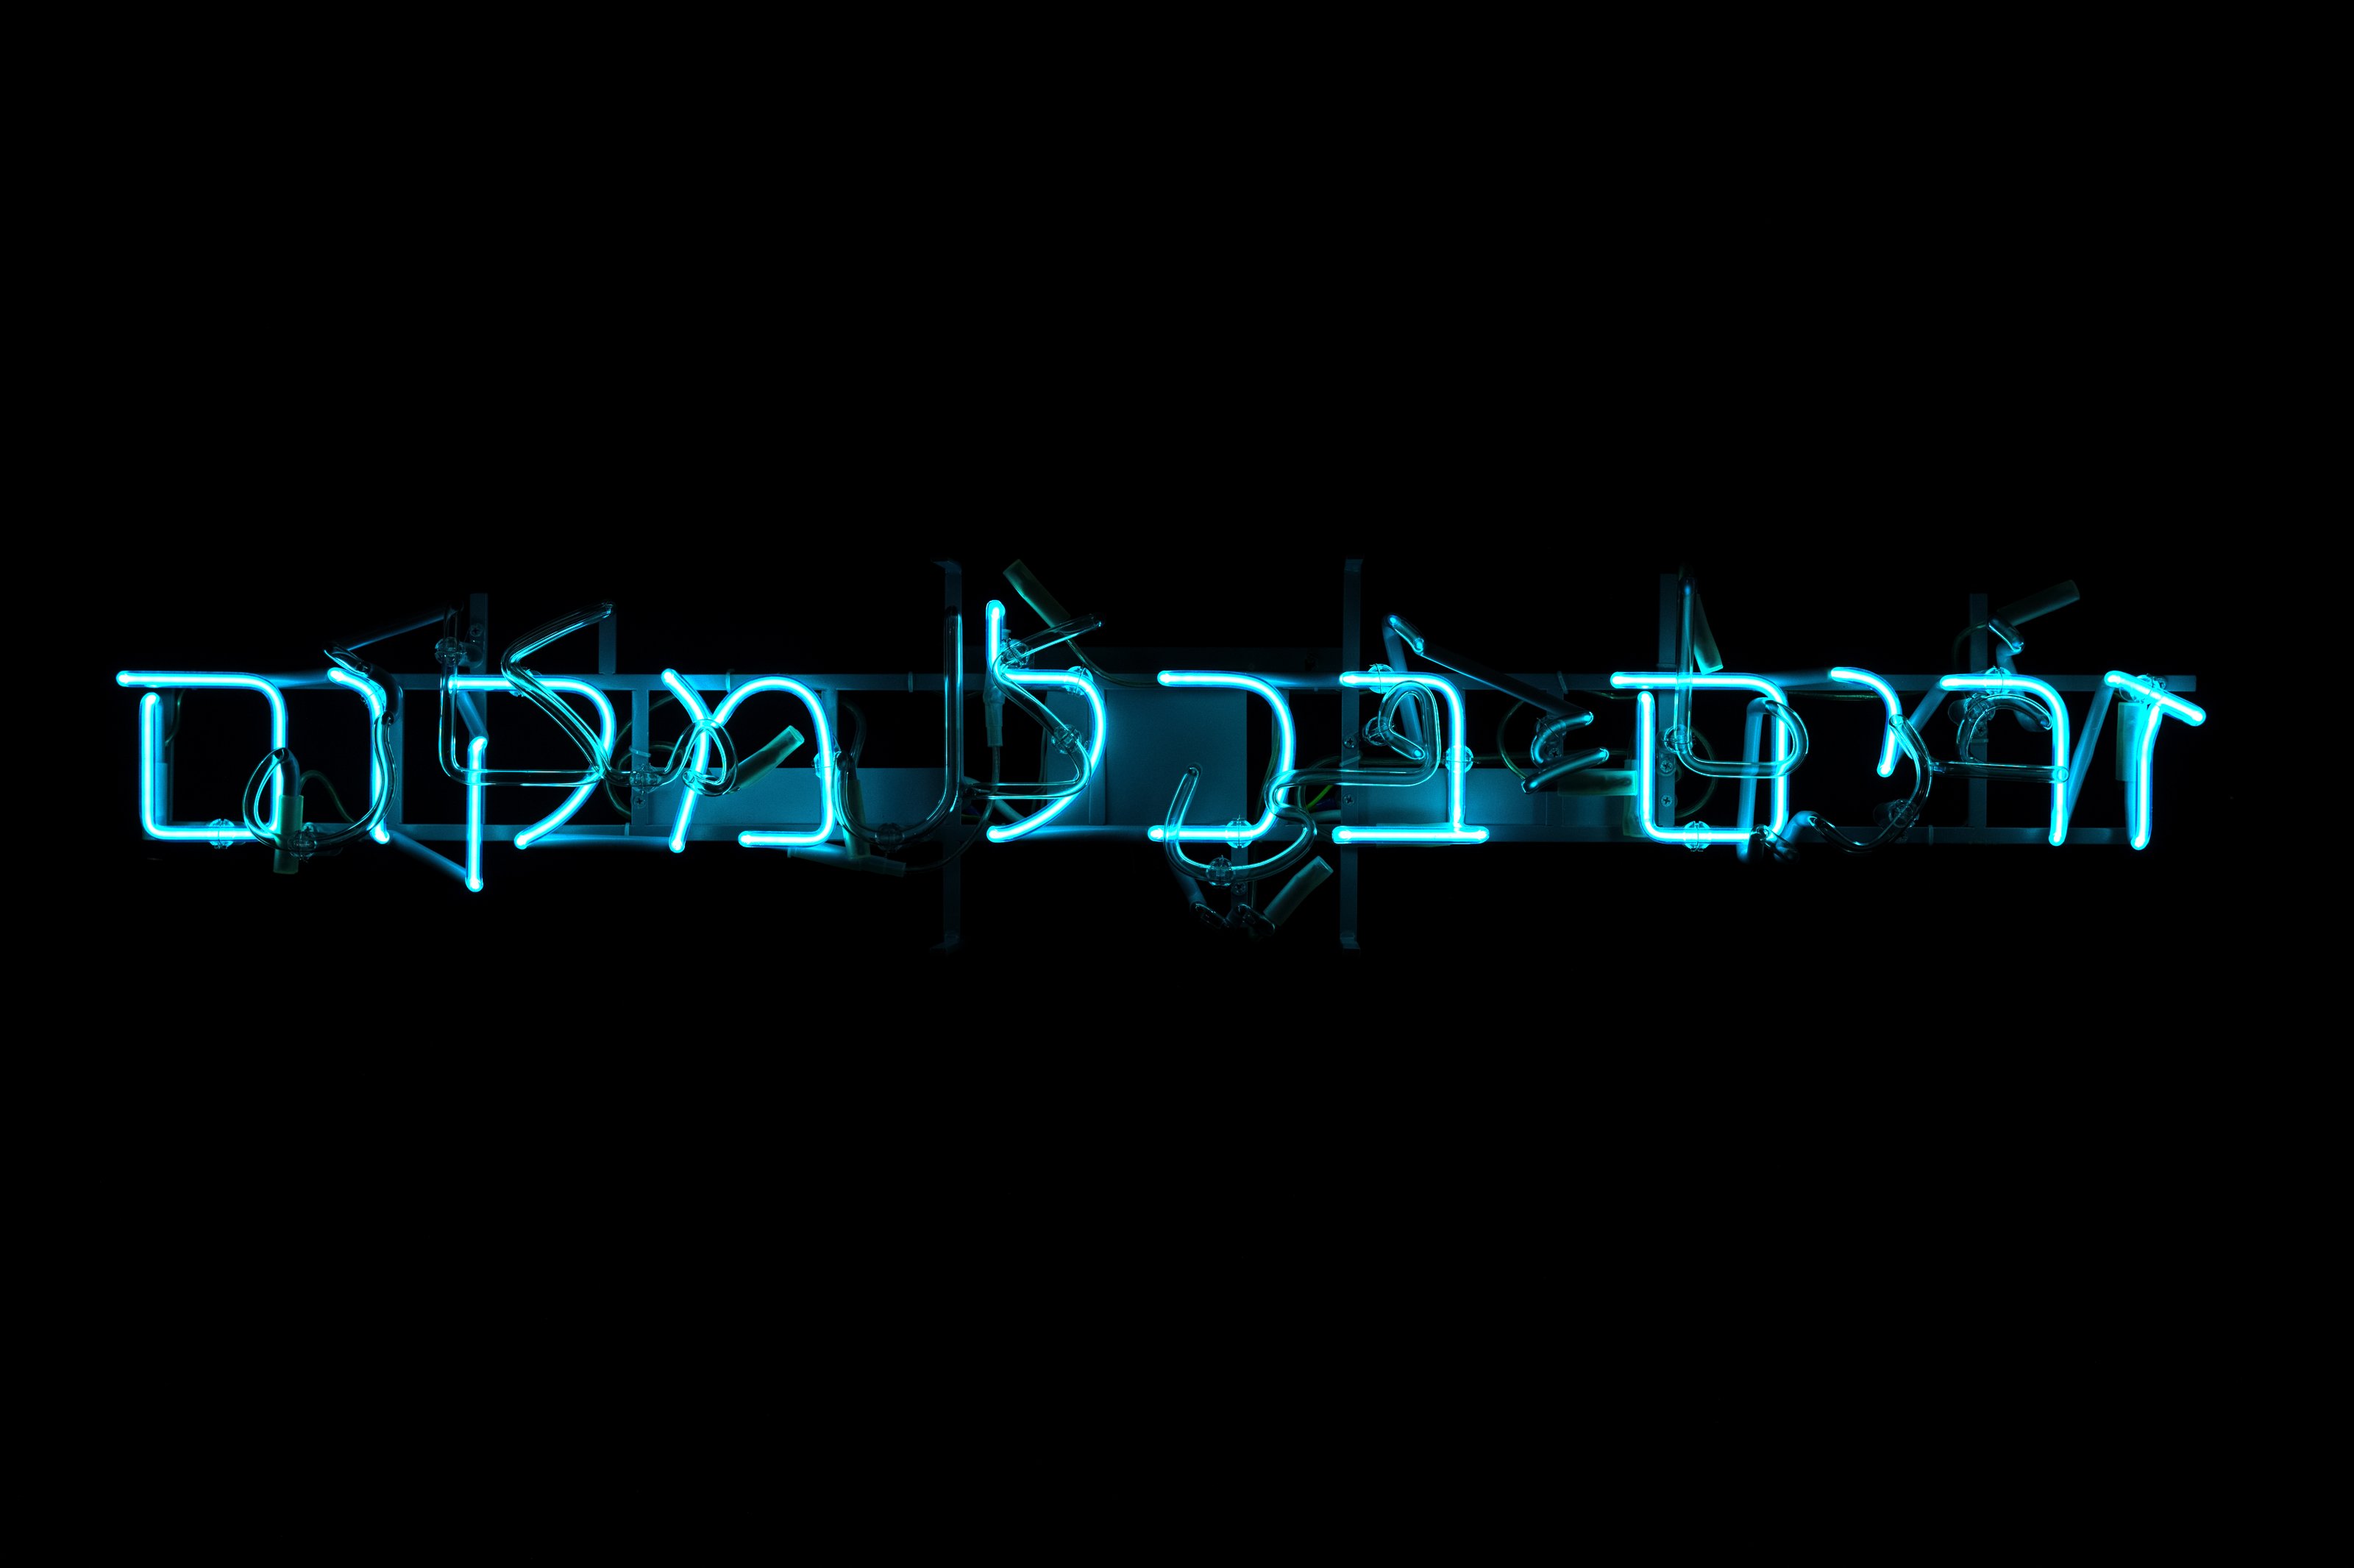 Neon blue text "Foreigners Everywhere" in Hebrew, part of Claire Fontaine's "Foreigners Everywhere, 2010" artwork.